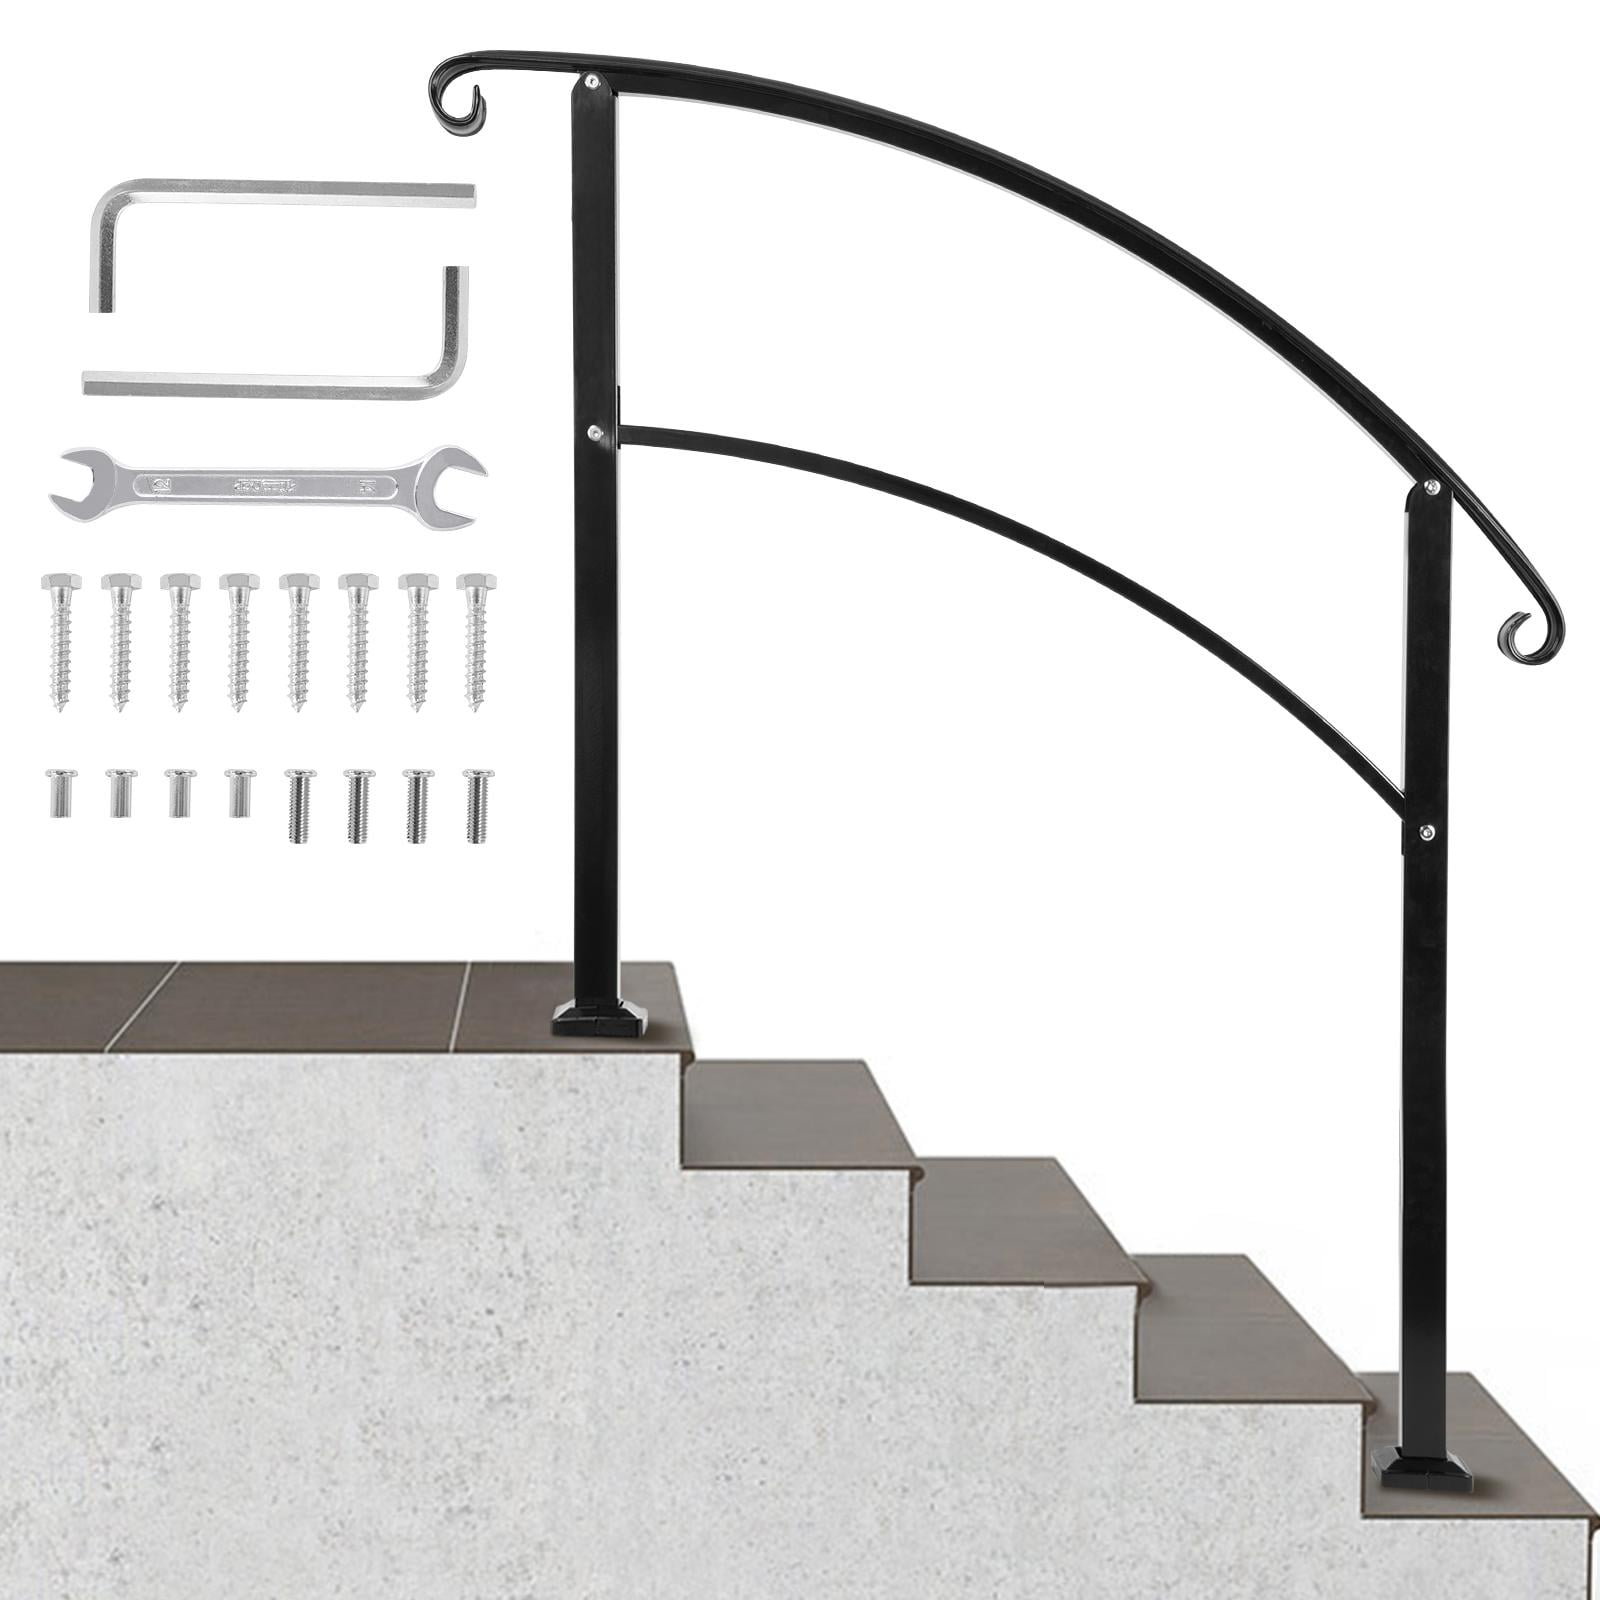 Black Wall Handrail 3ft Section for Stairs Steps Dark Iron-Easy Install for Outdoor Indoor Stairs Porch Deck Hand Rail